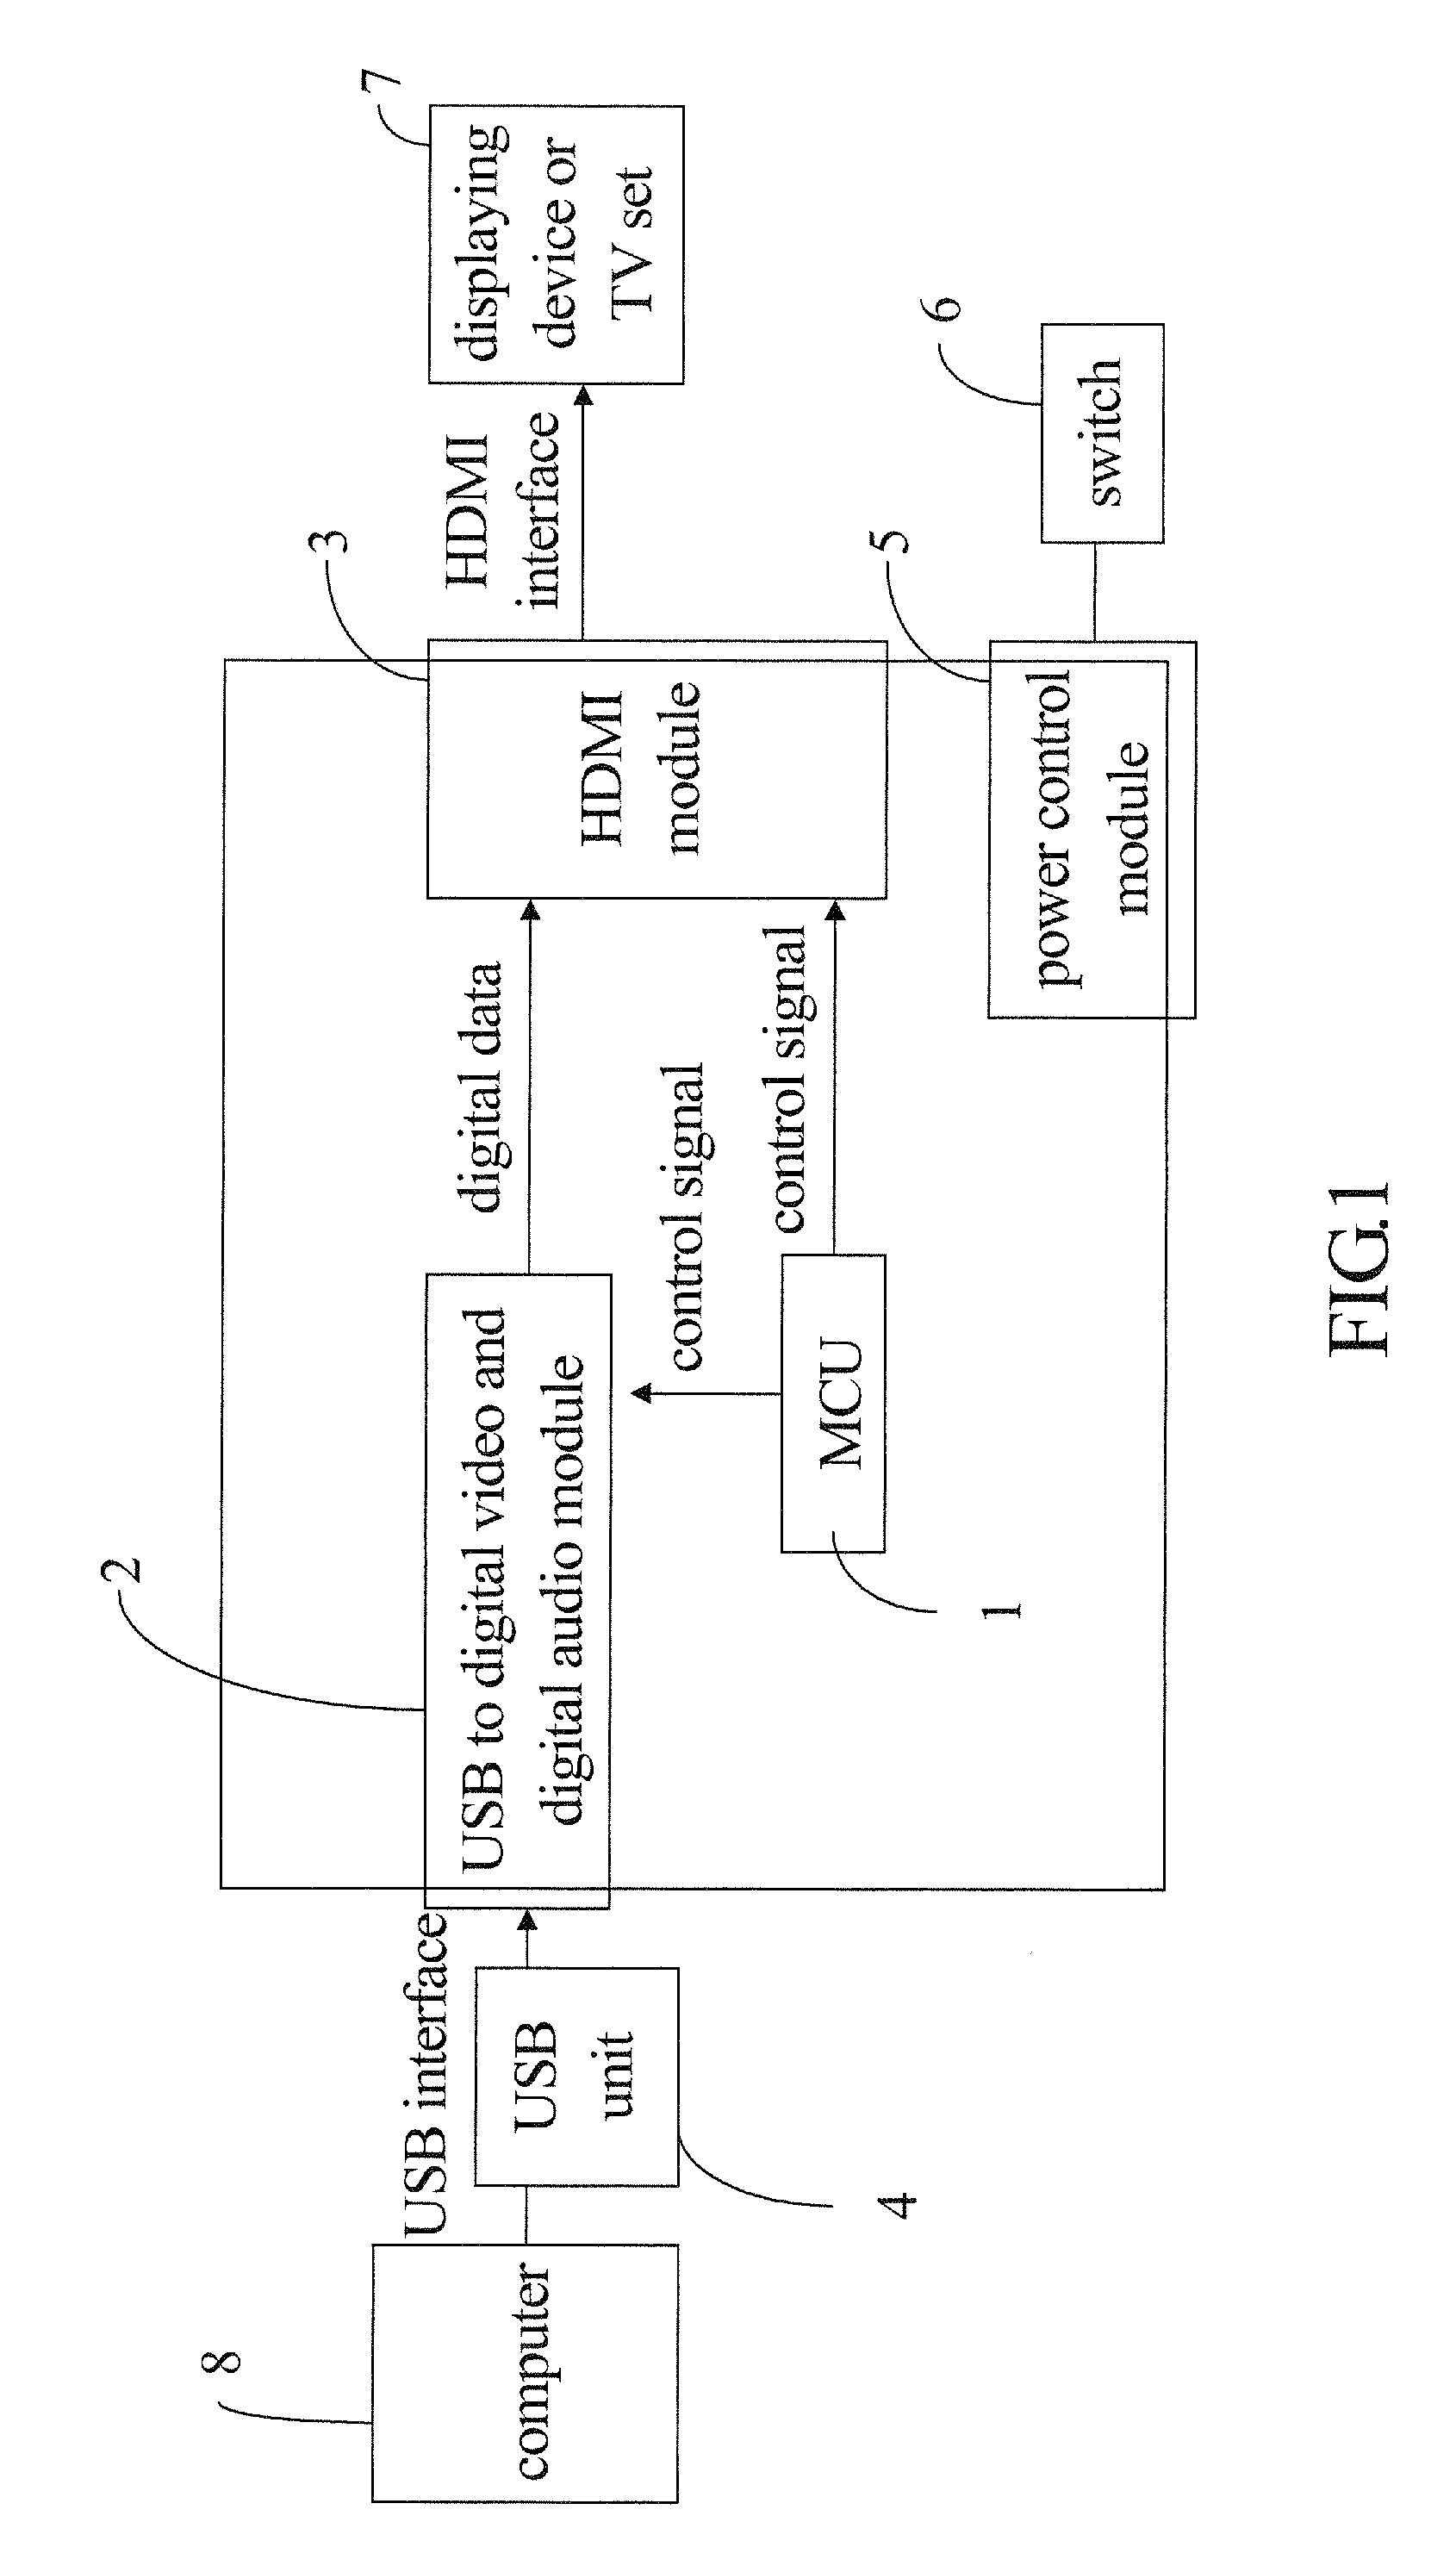 Universal serial bus (USB) interface device having functions of high definition conversion and audio supporting